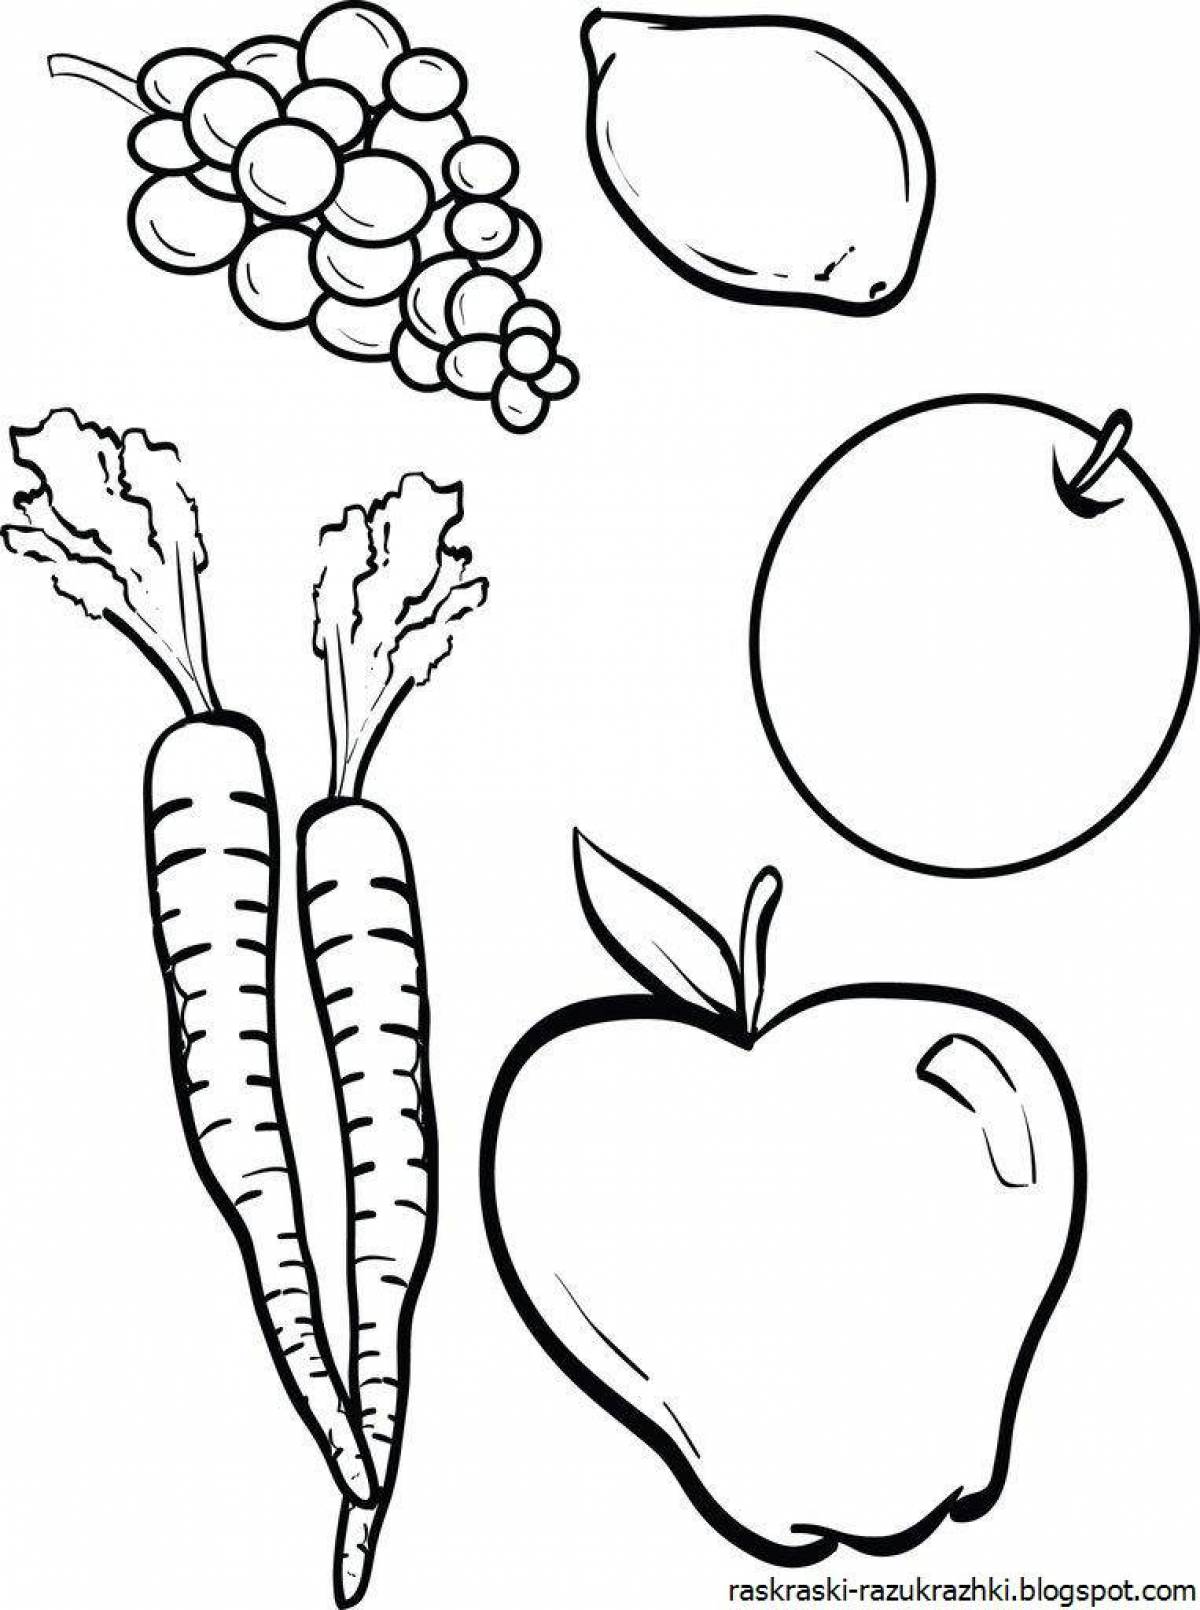 Attractive fruit coloring book for 3-4 year olds